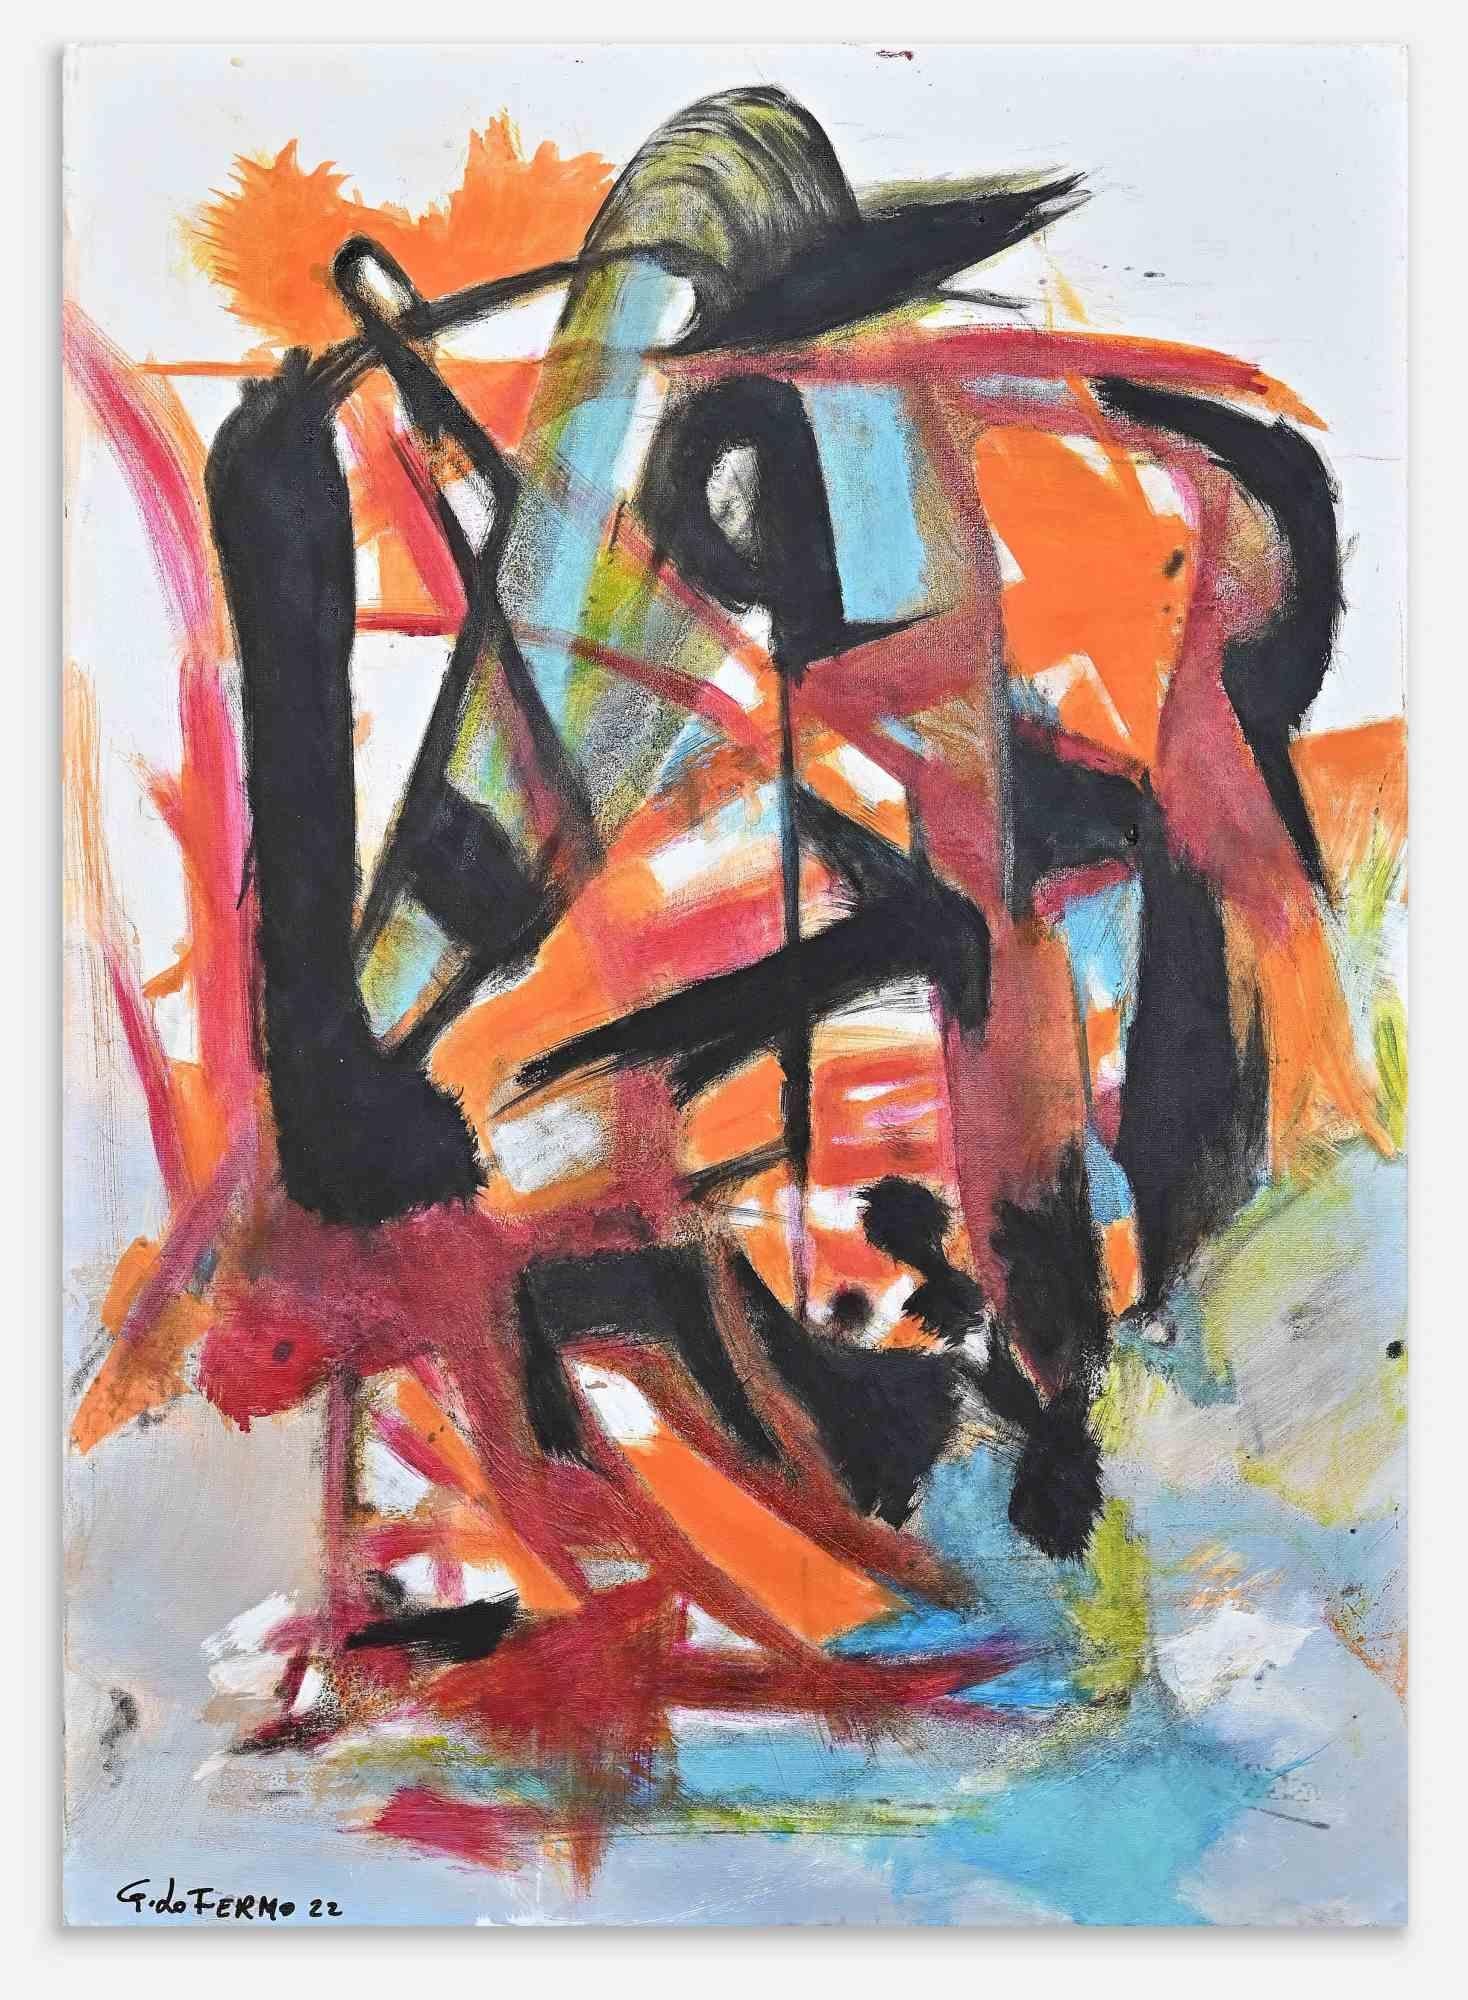 Abstract Expression is an artwork realized by Giorgio Lo Fermo (b. 1947) in 2022.

Original Oil Painting on Canvas.

Hand signed and dated on the lower left margin.

Original title: Espressionismo astratto

Hand-signed, titled on the back of the